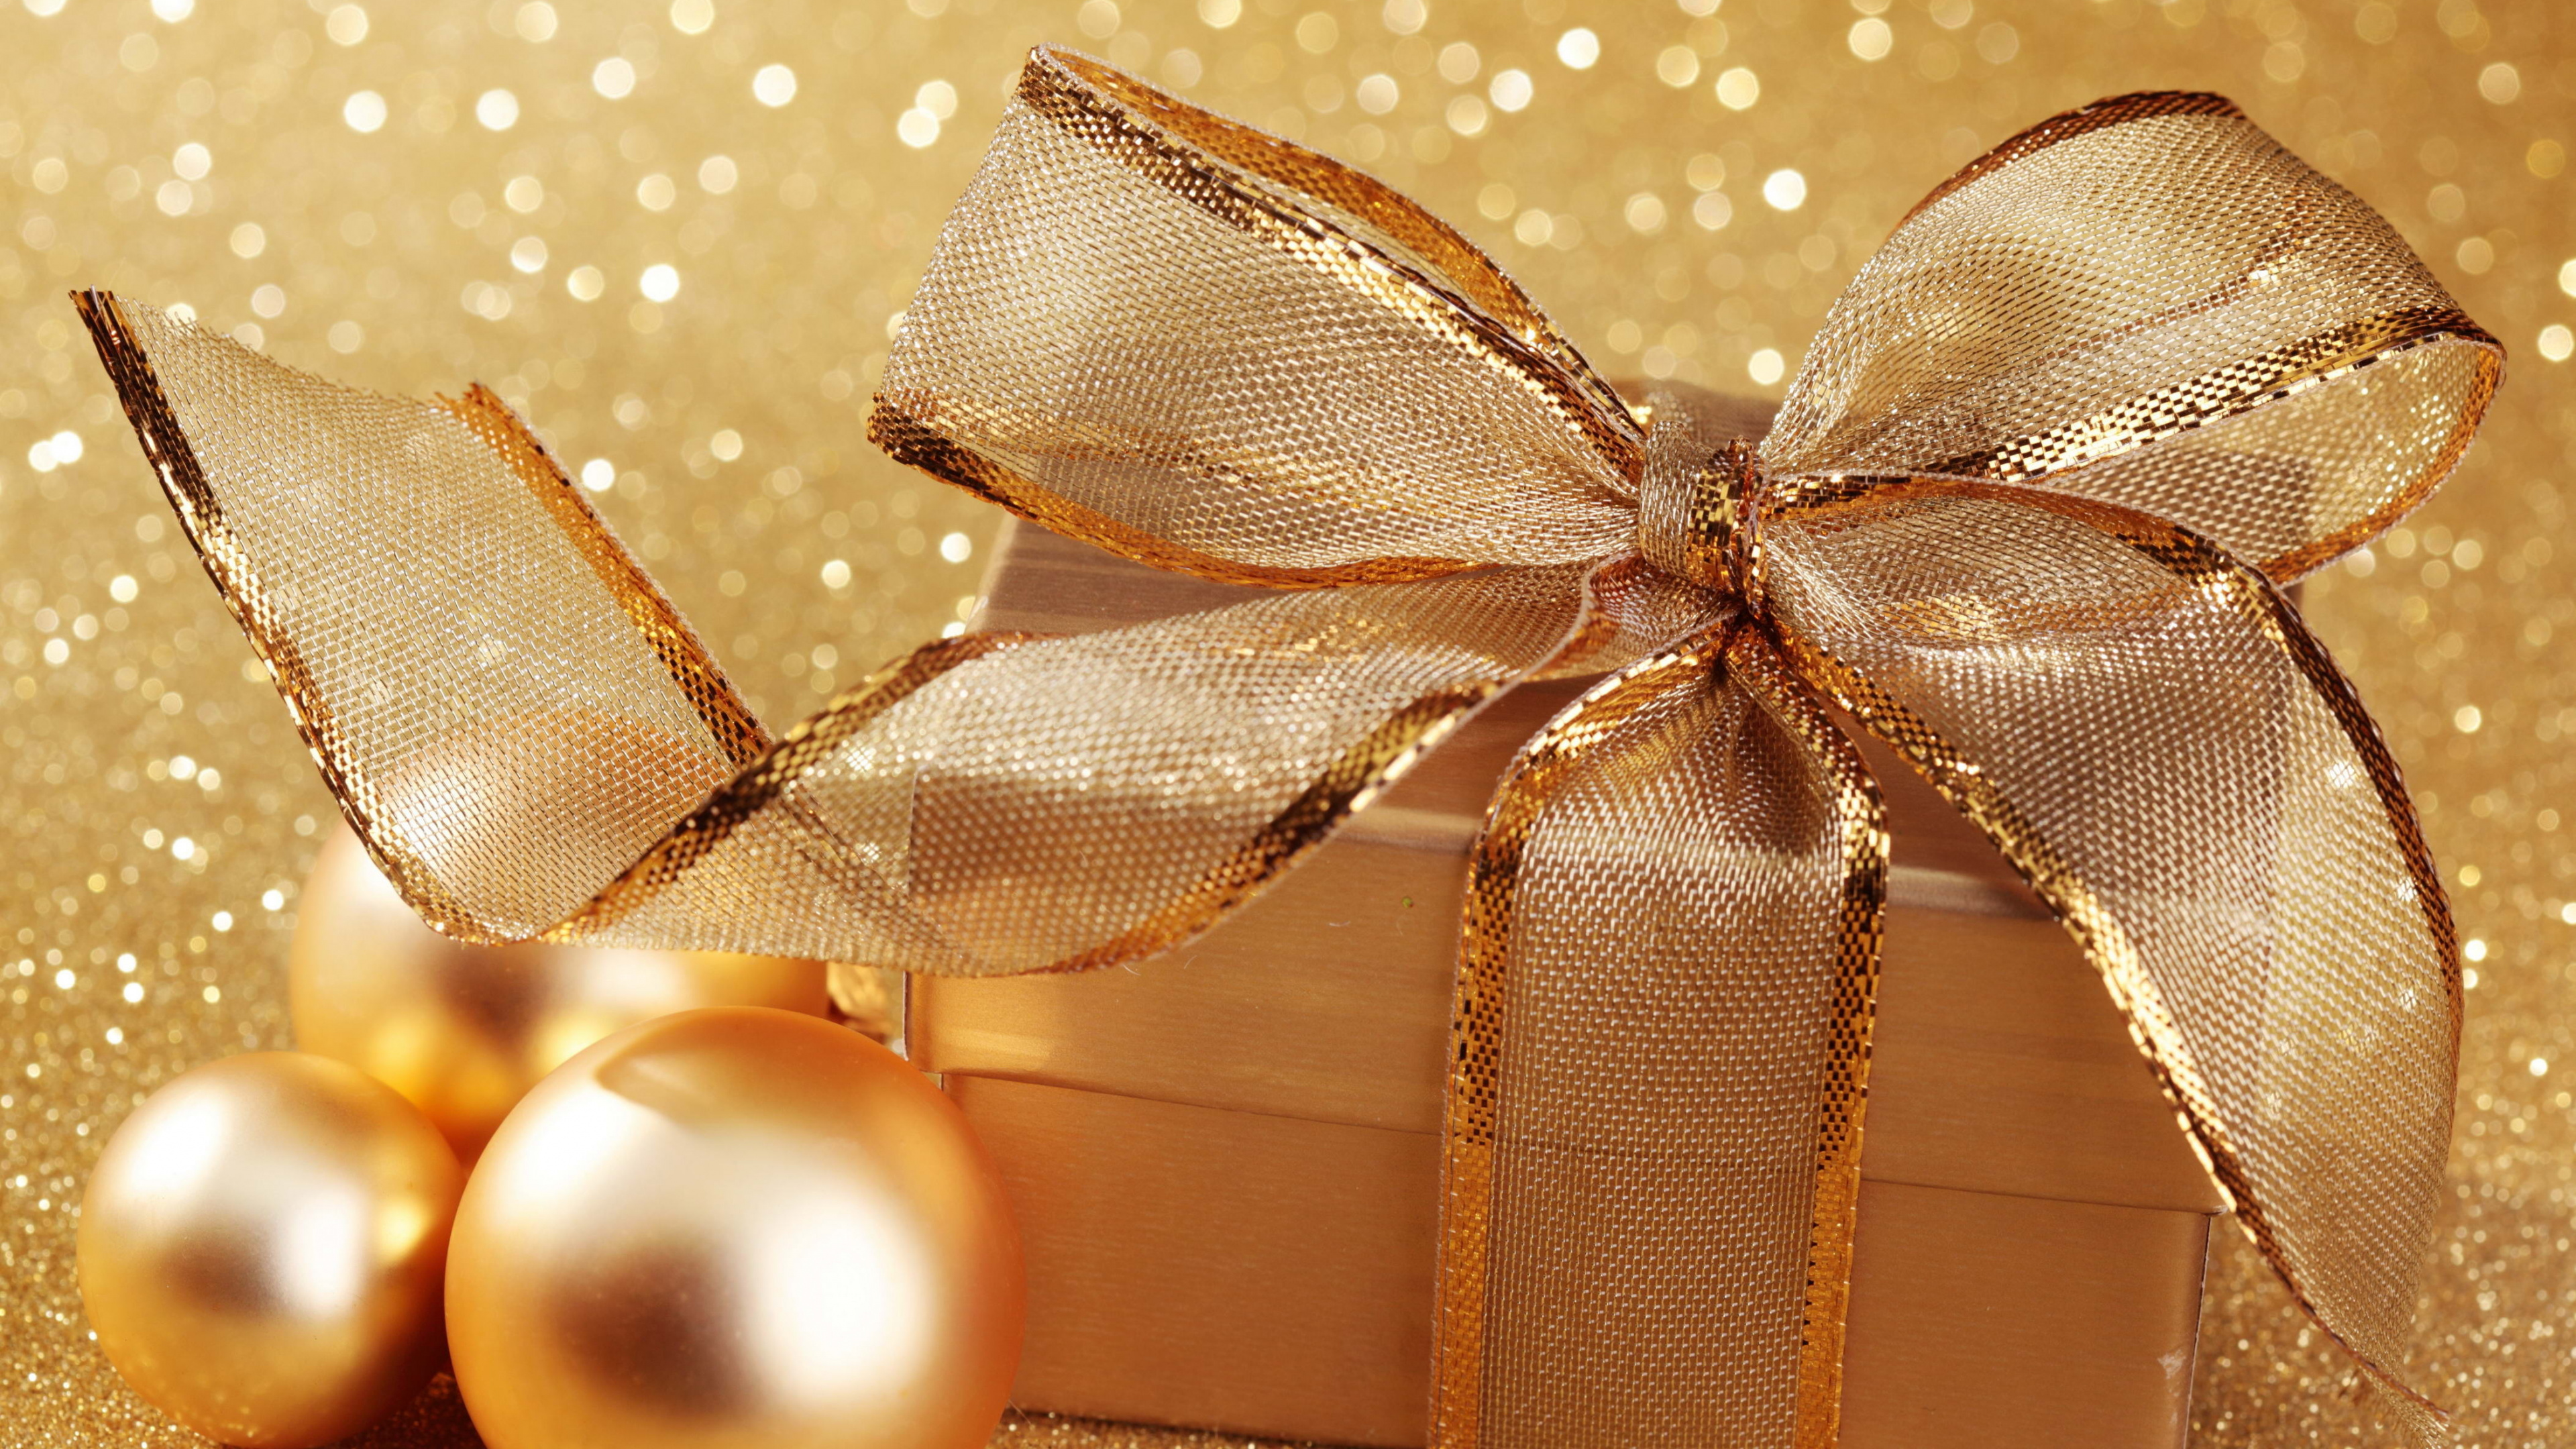 New Year, Christmas Day, Holiday, Ribbon, Present. Wallpaper in 3840x2160 Resolution